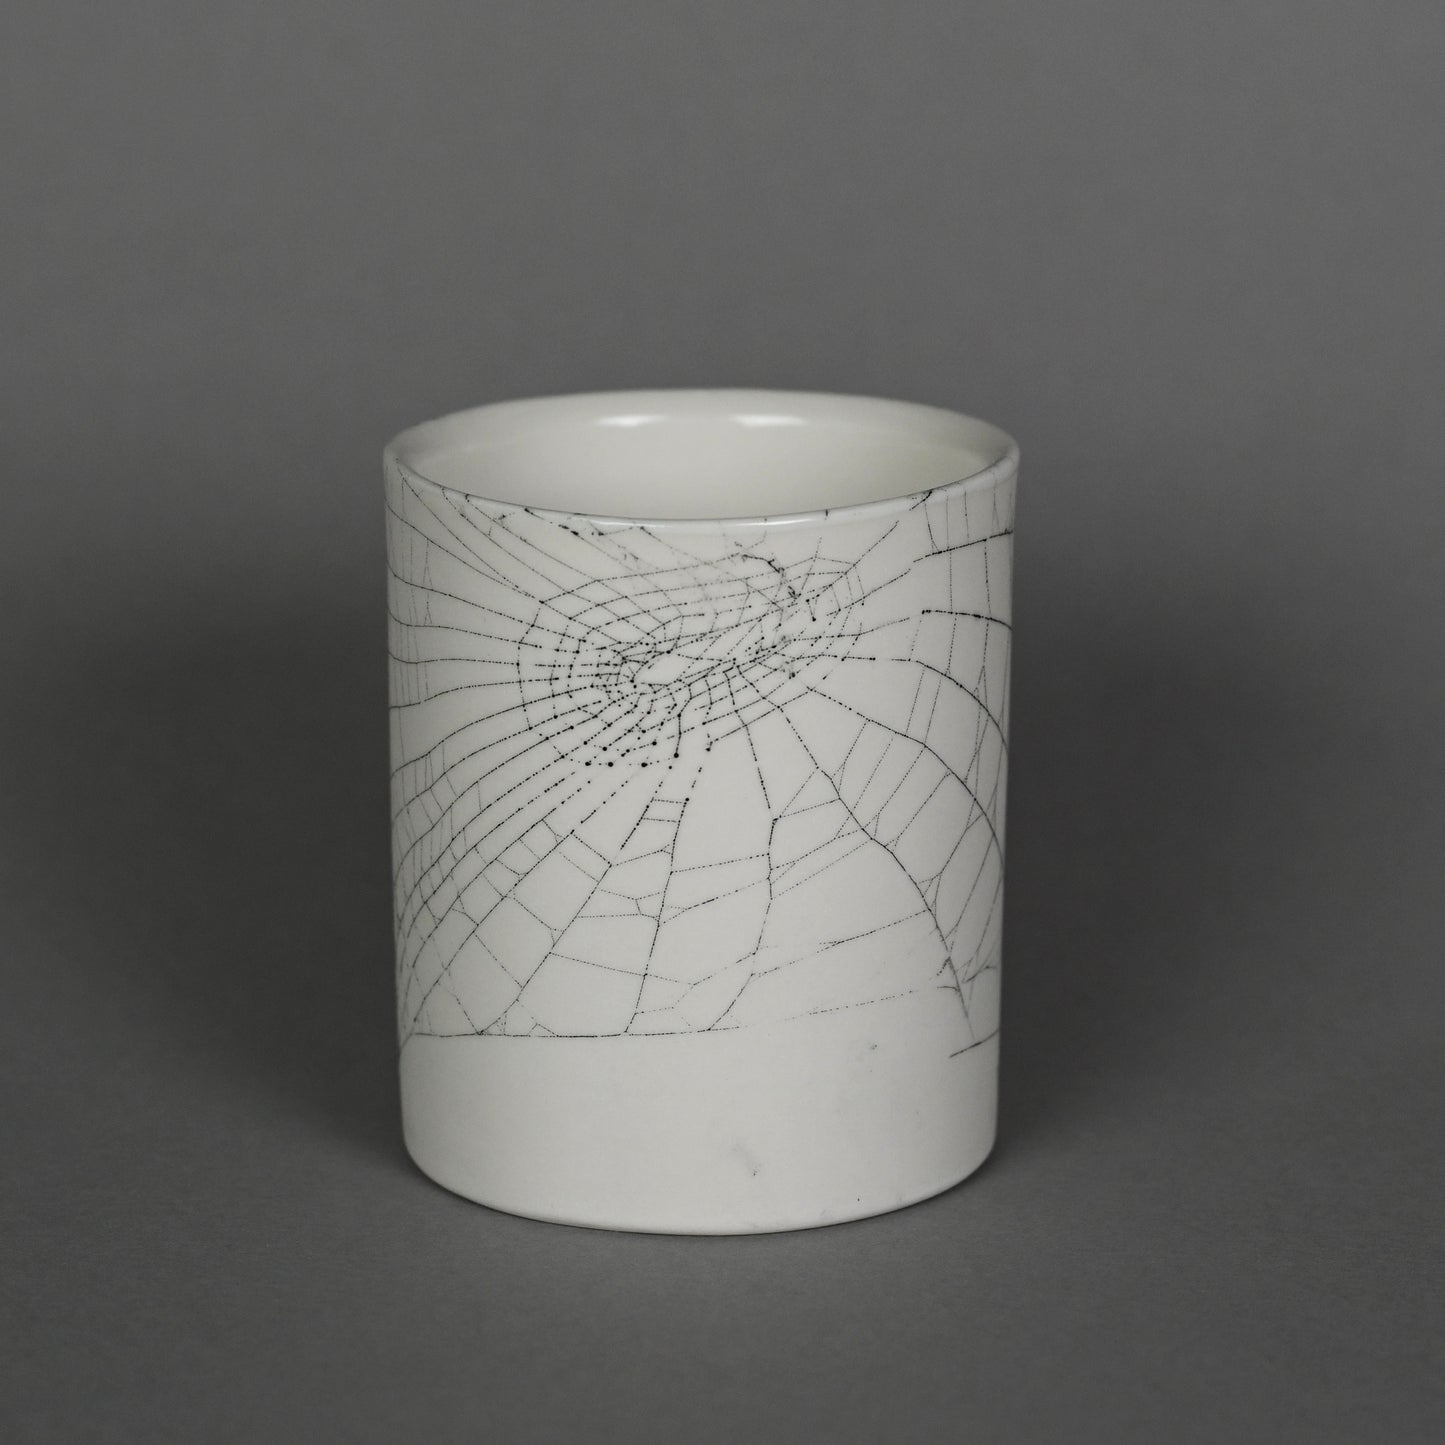 Web on Clay (210), Collected September 24, 2022